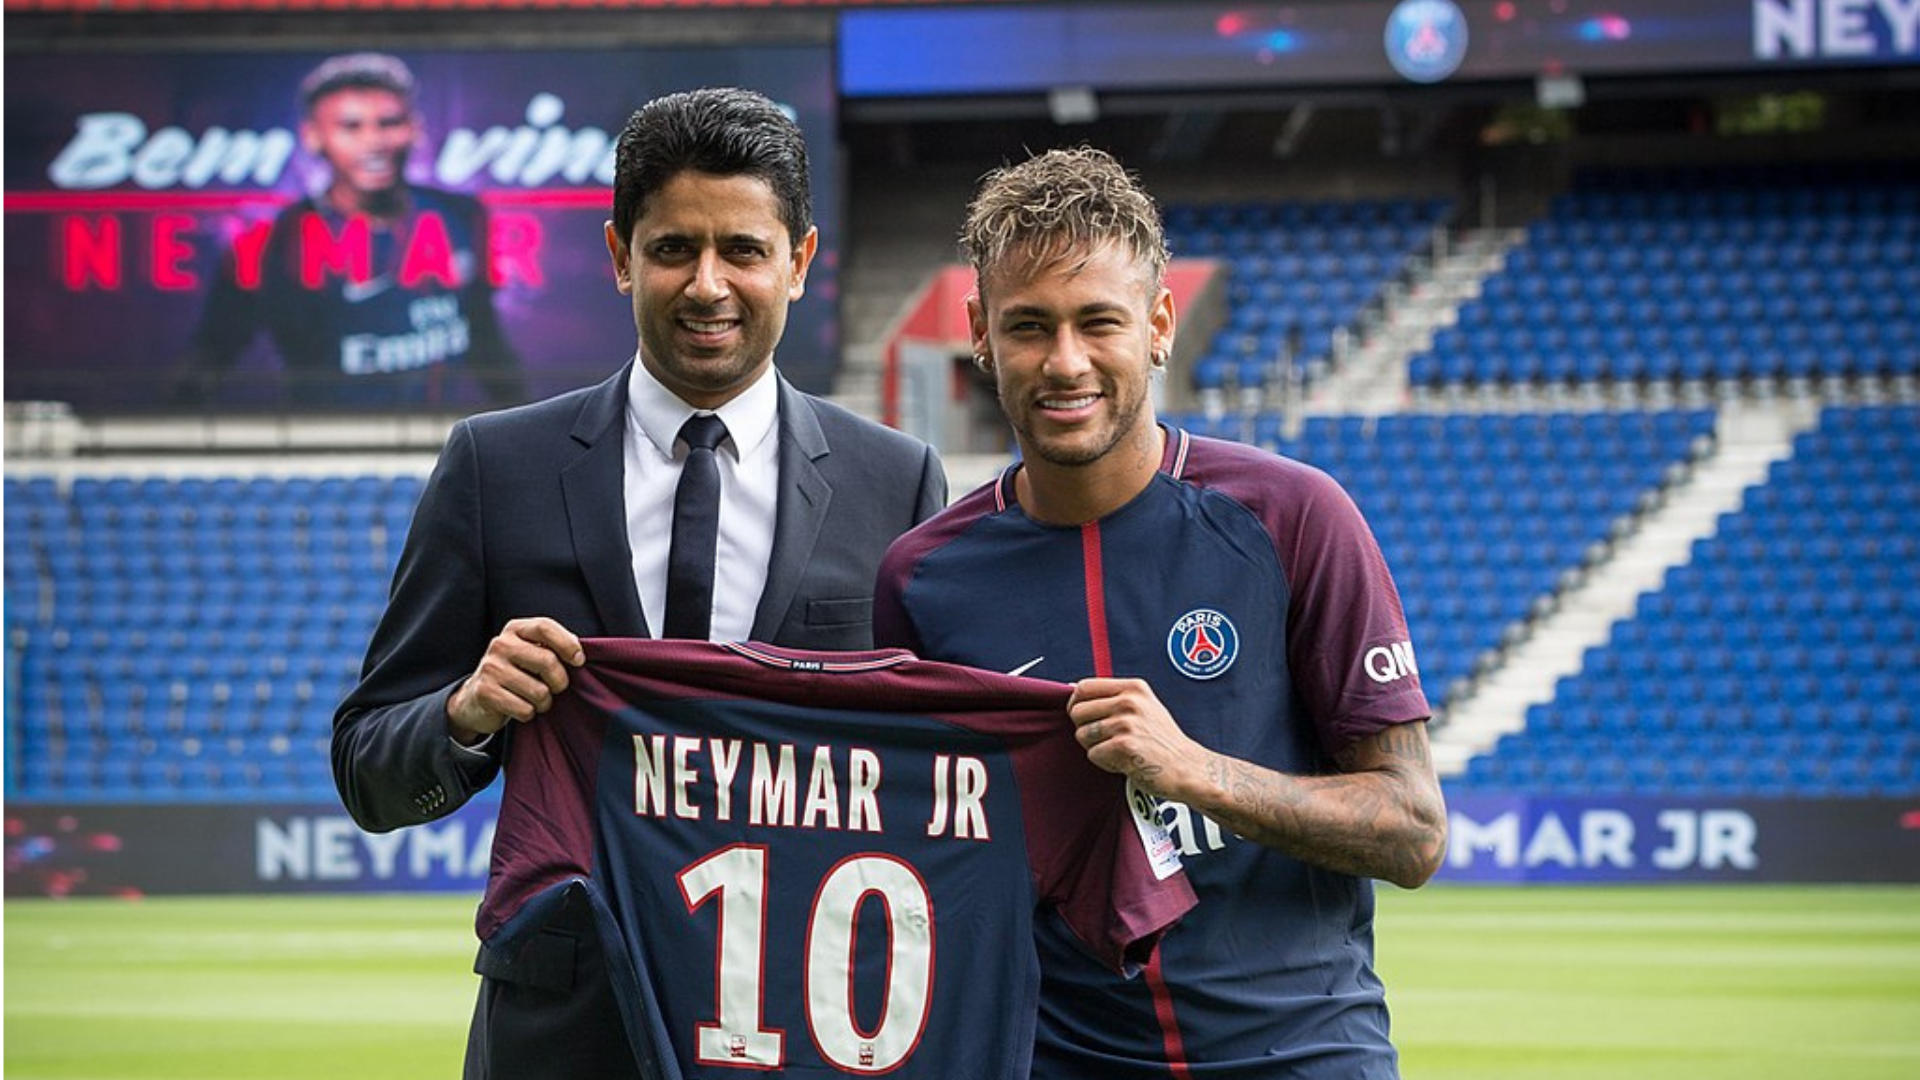 Neymar: The transfer that changed football price tags